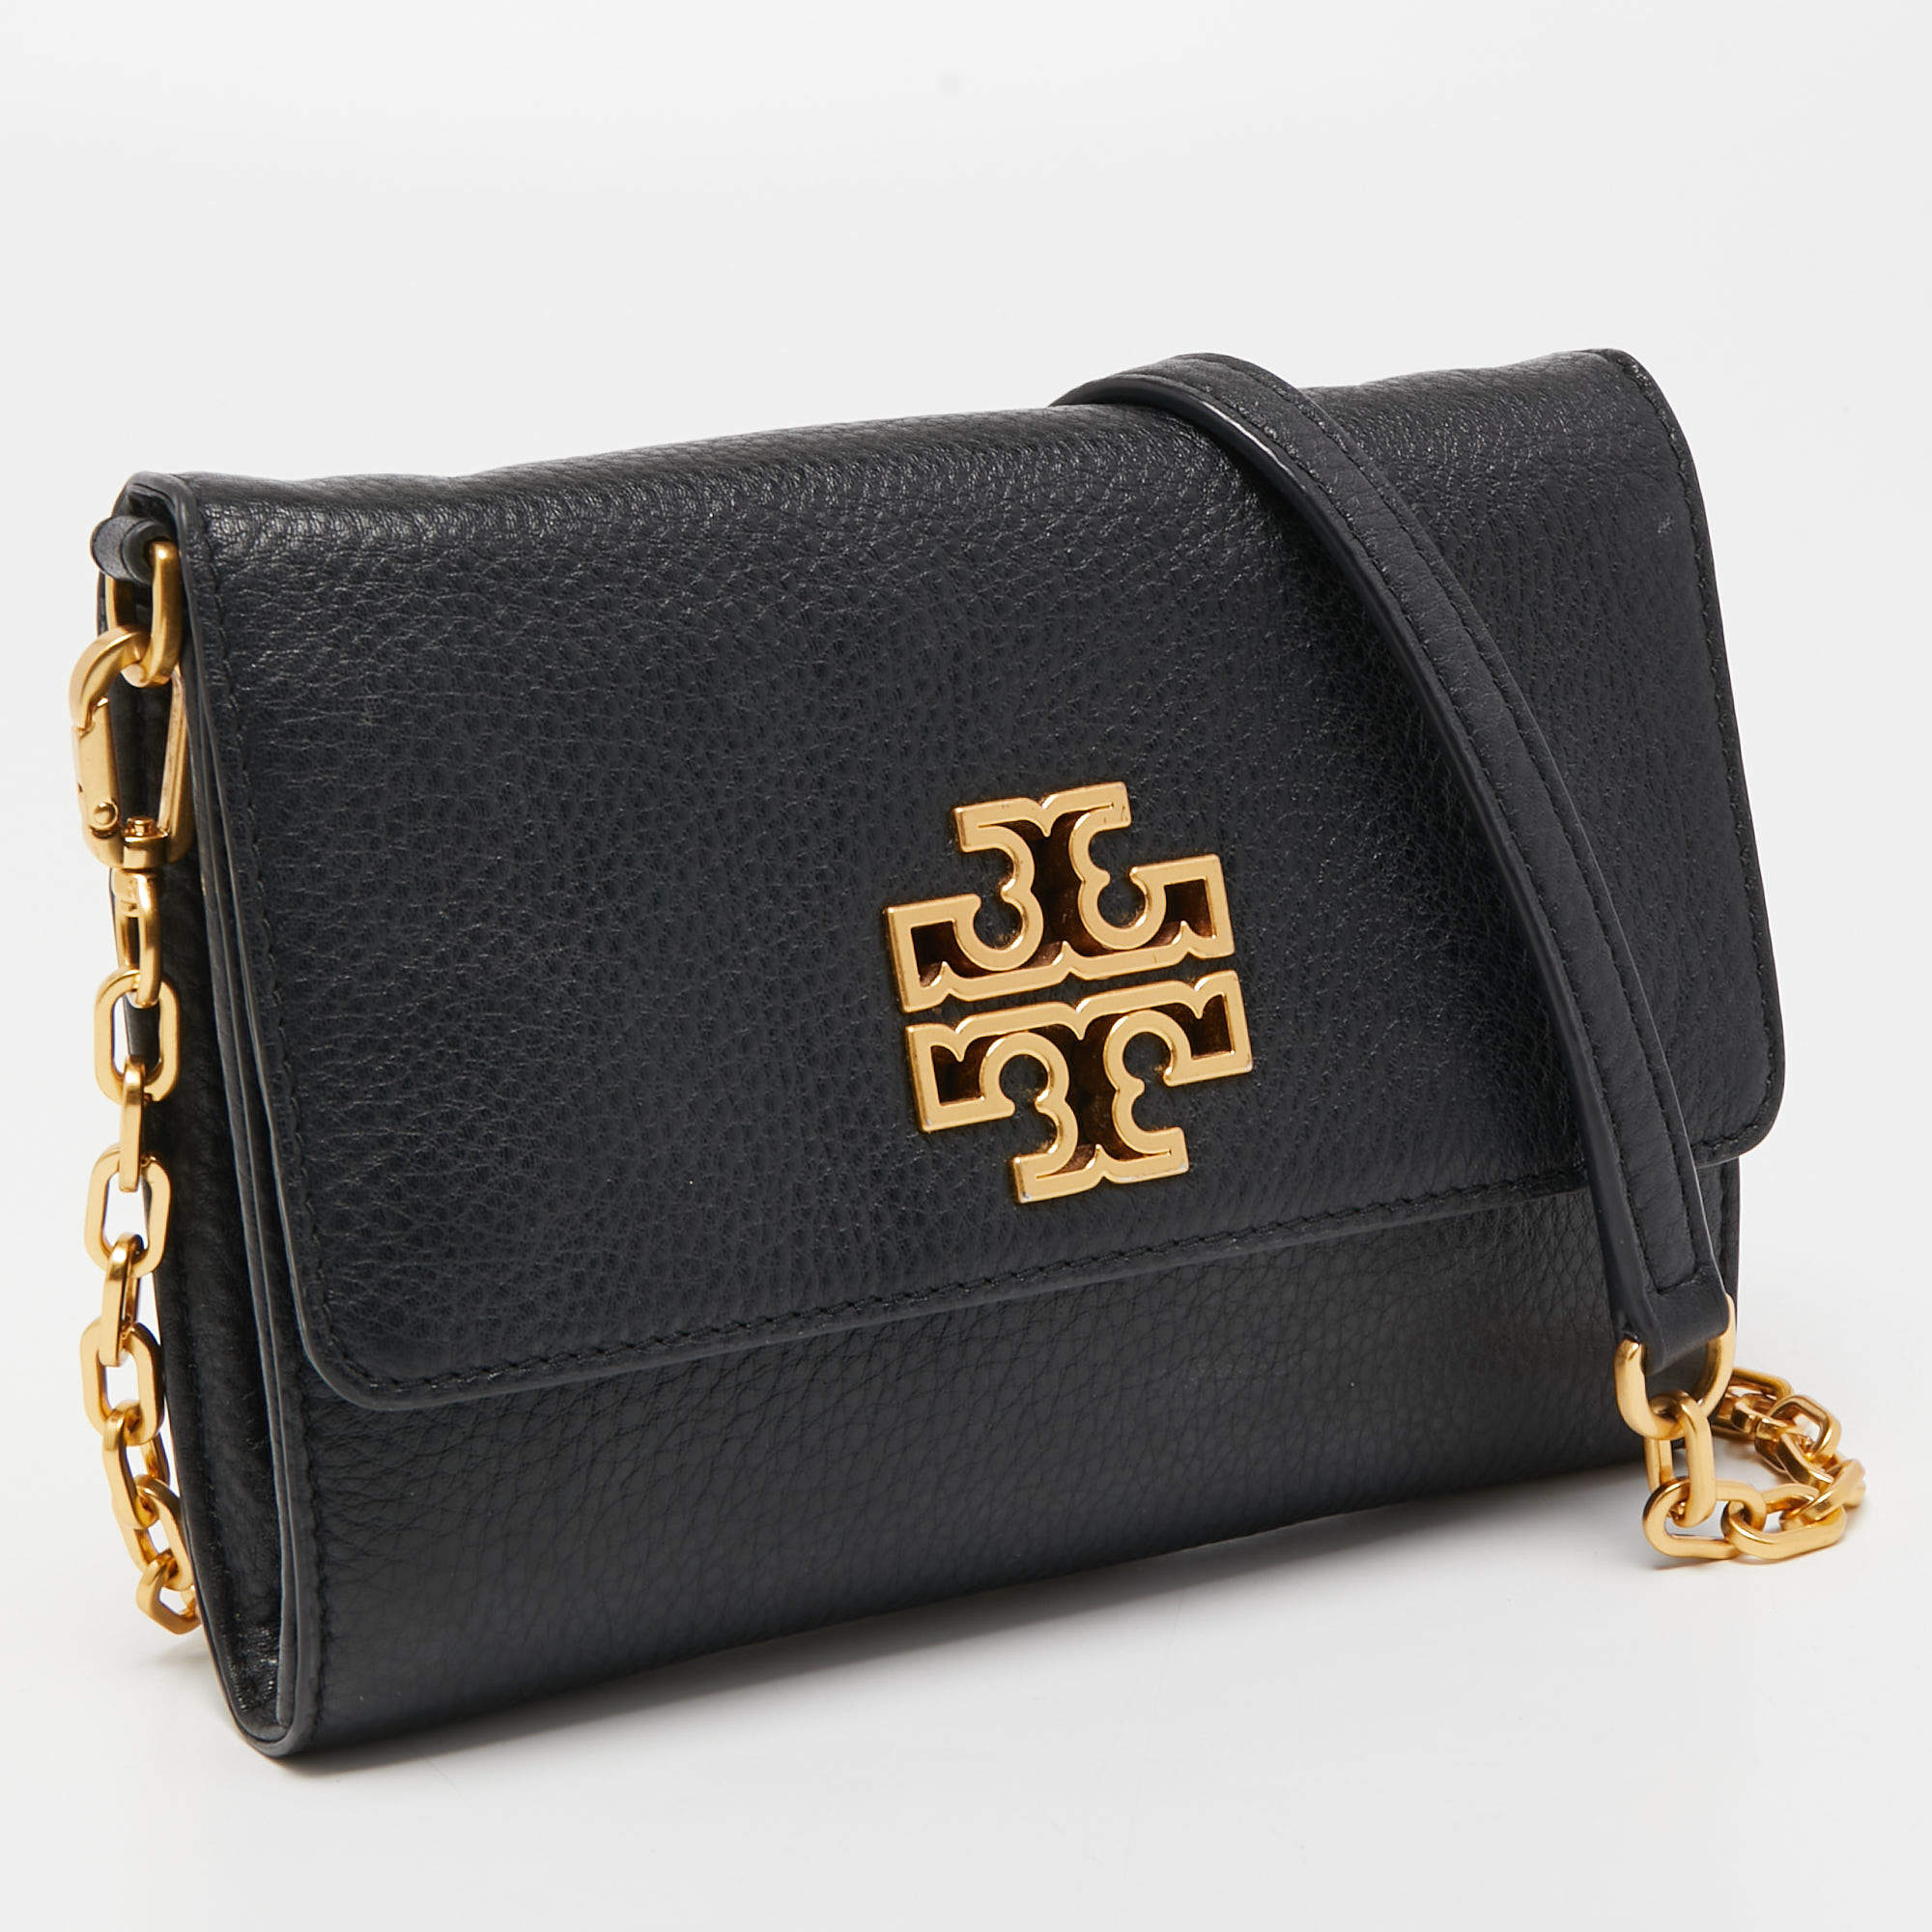 Authentic TORY BURCH Britten Leather Convertible CROSSBODY Bag, NWT, Black